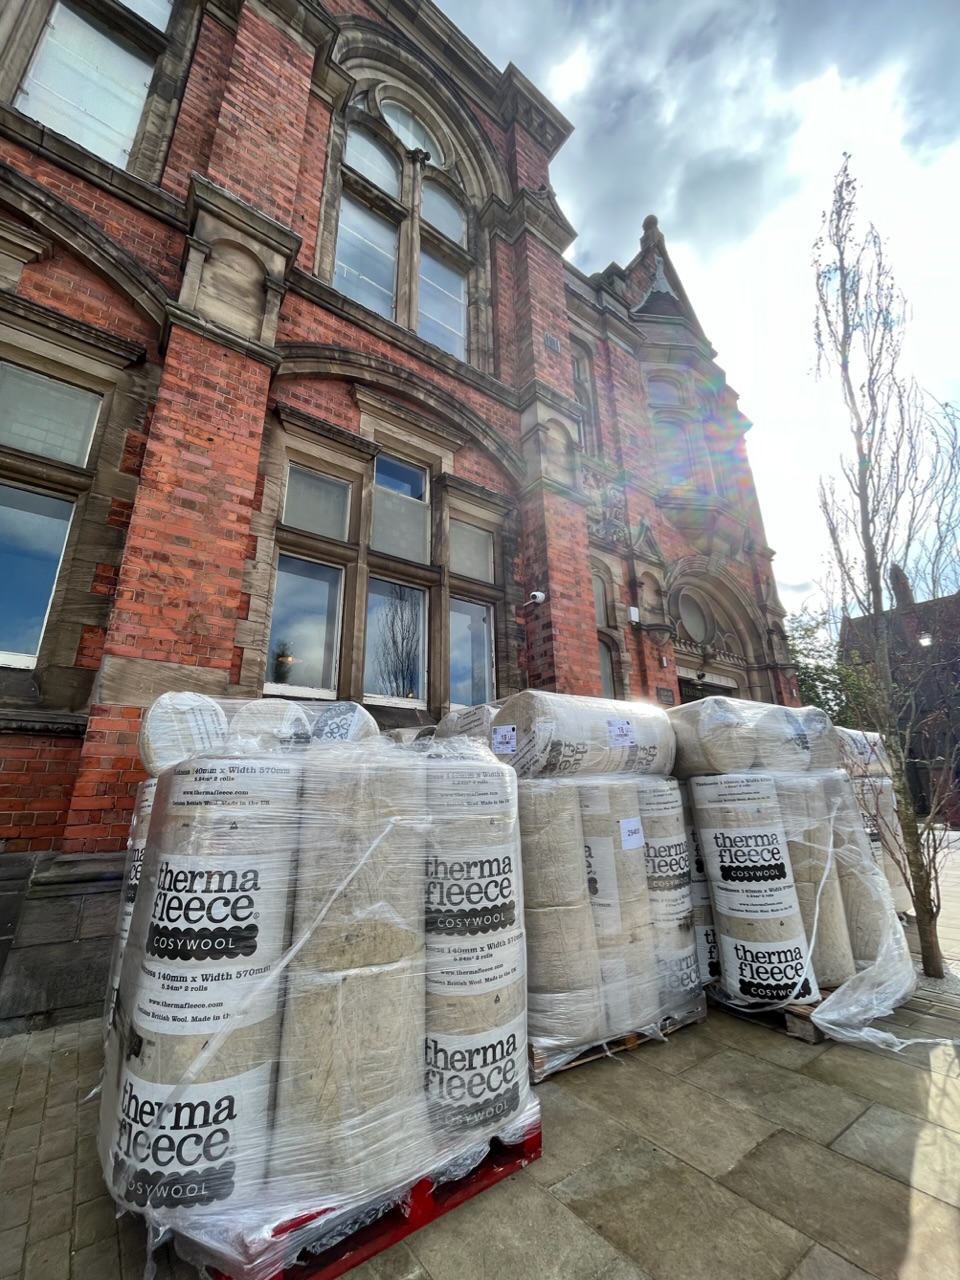 Arriving at Fenton Town Hall in North Staffordshire – a load of sheep’s wool insulation.